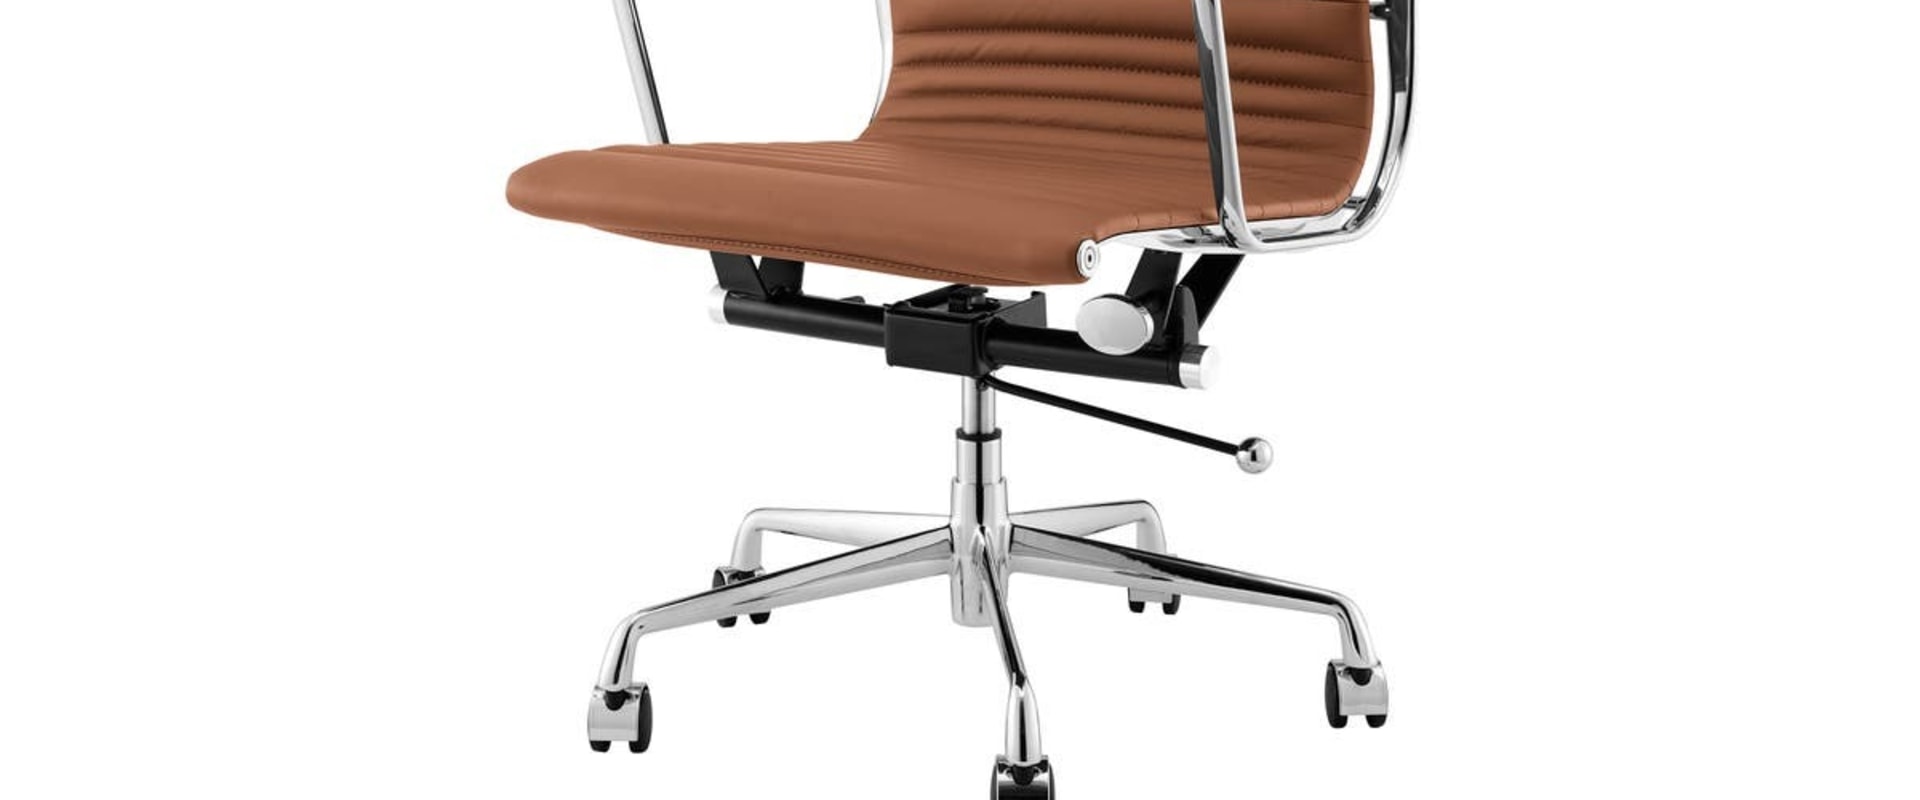 Customizing Your Eames Office Chair Replica